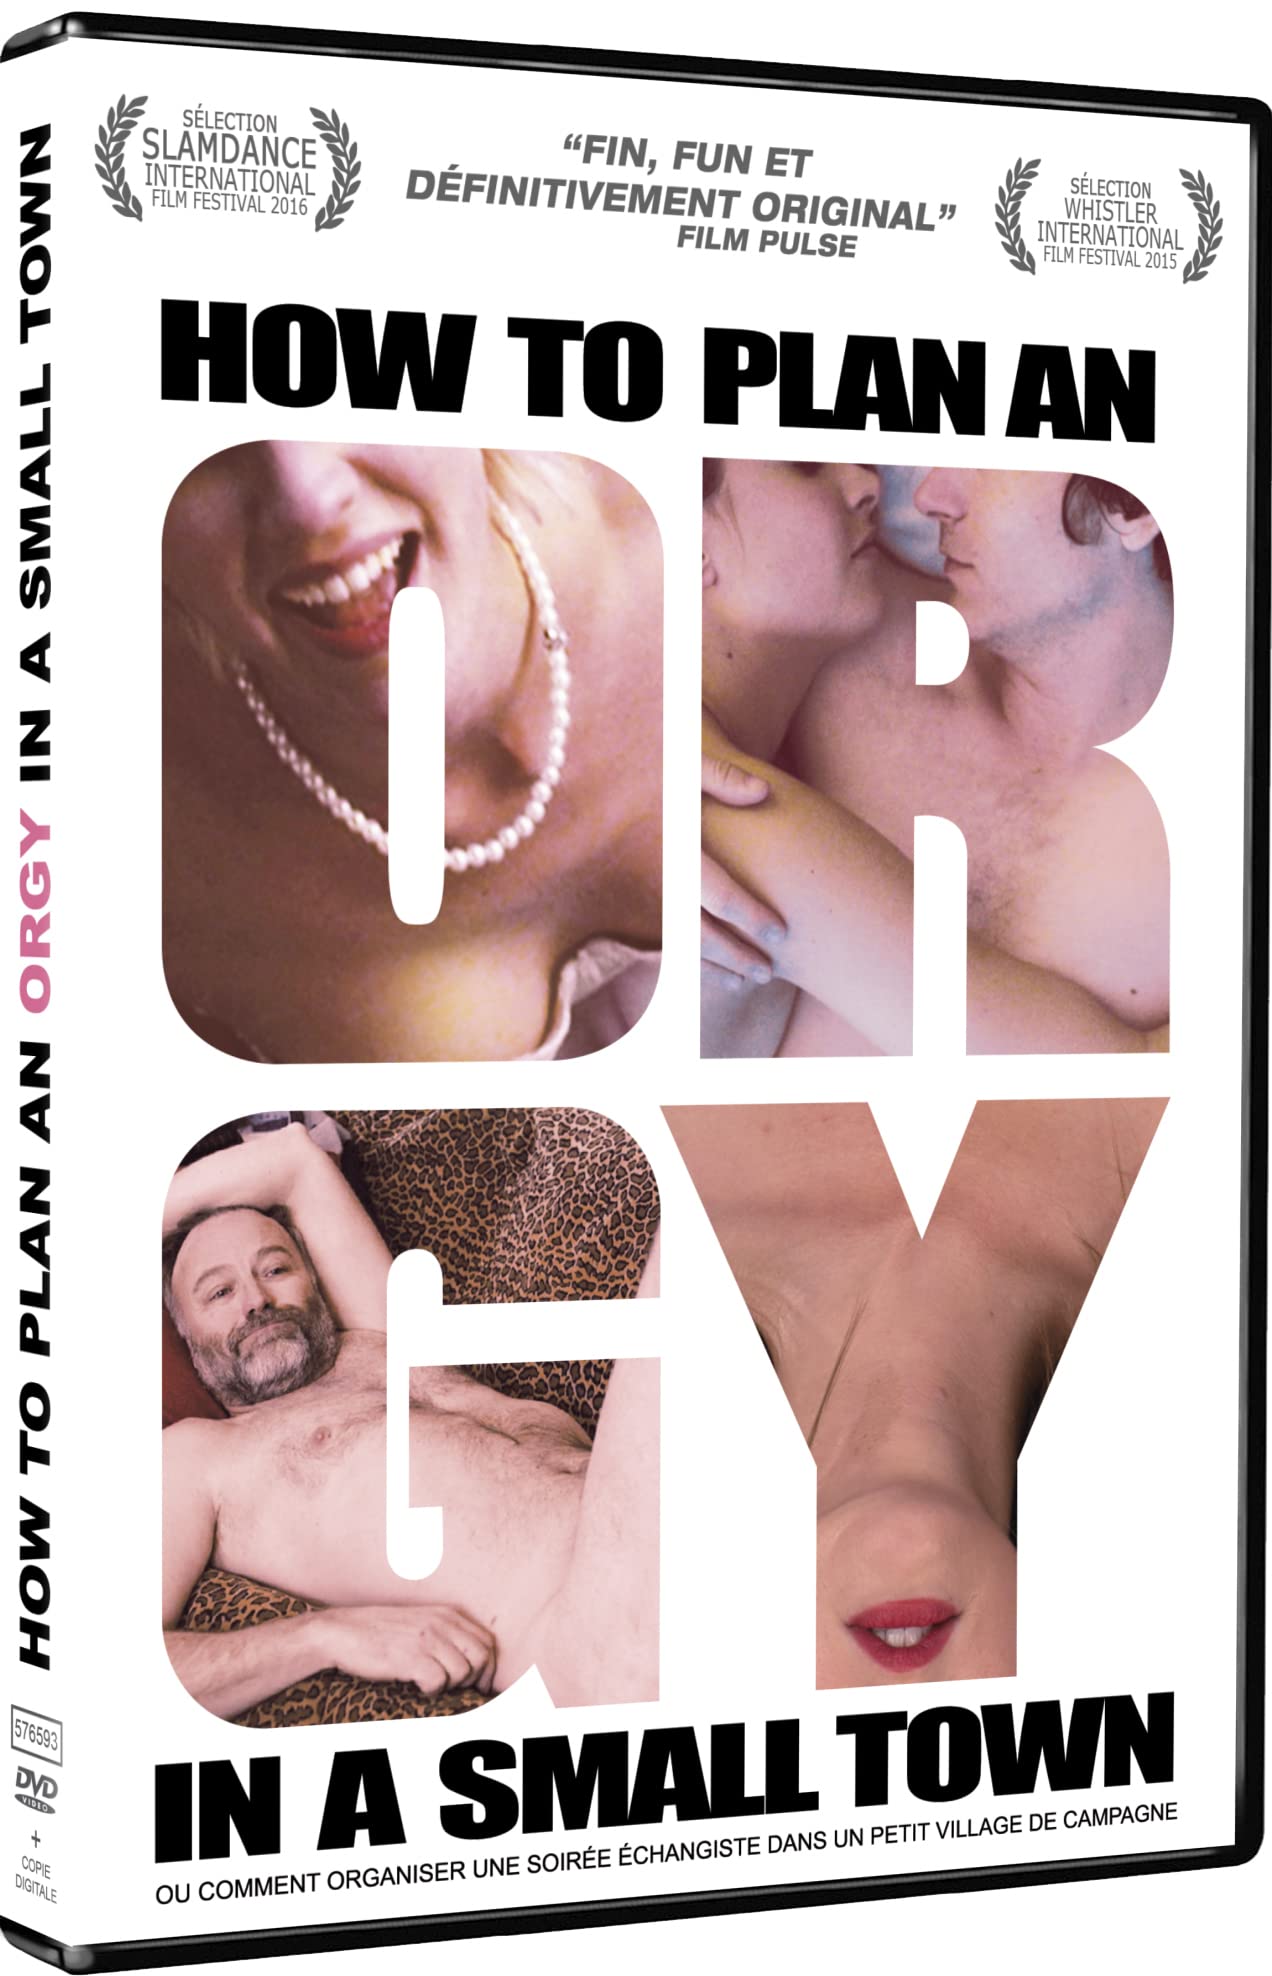 How to plan an orgy in a small town [FR Import]